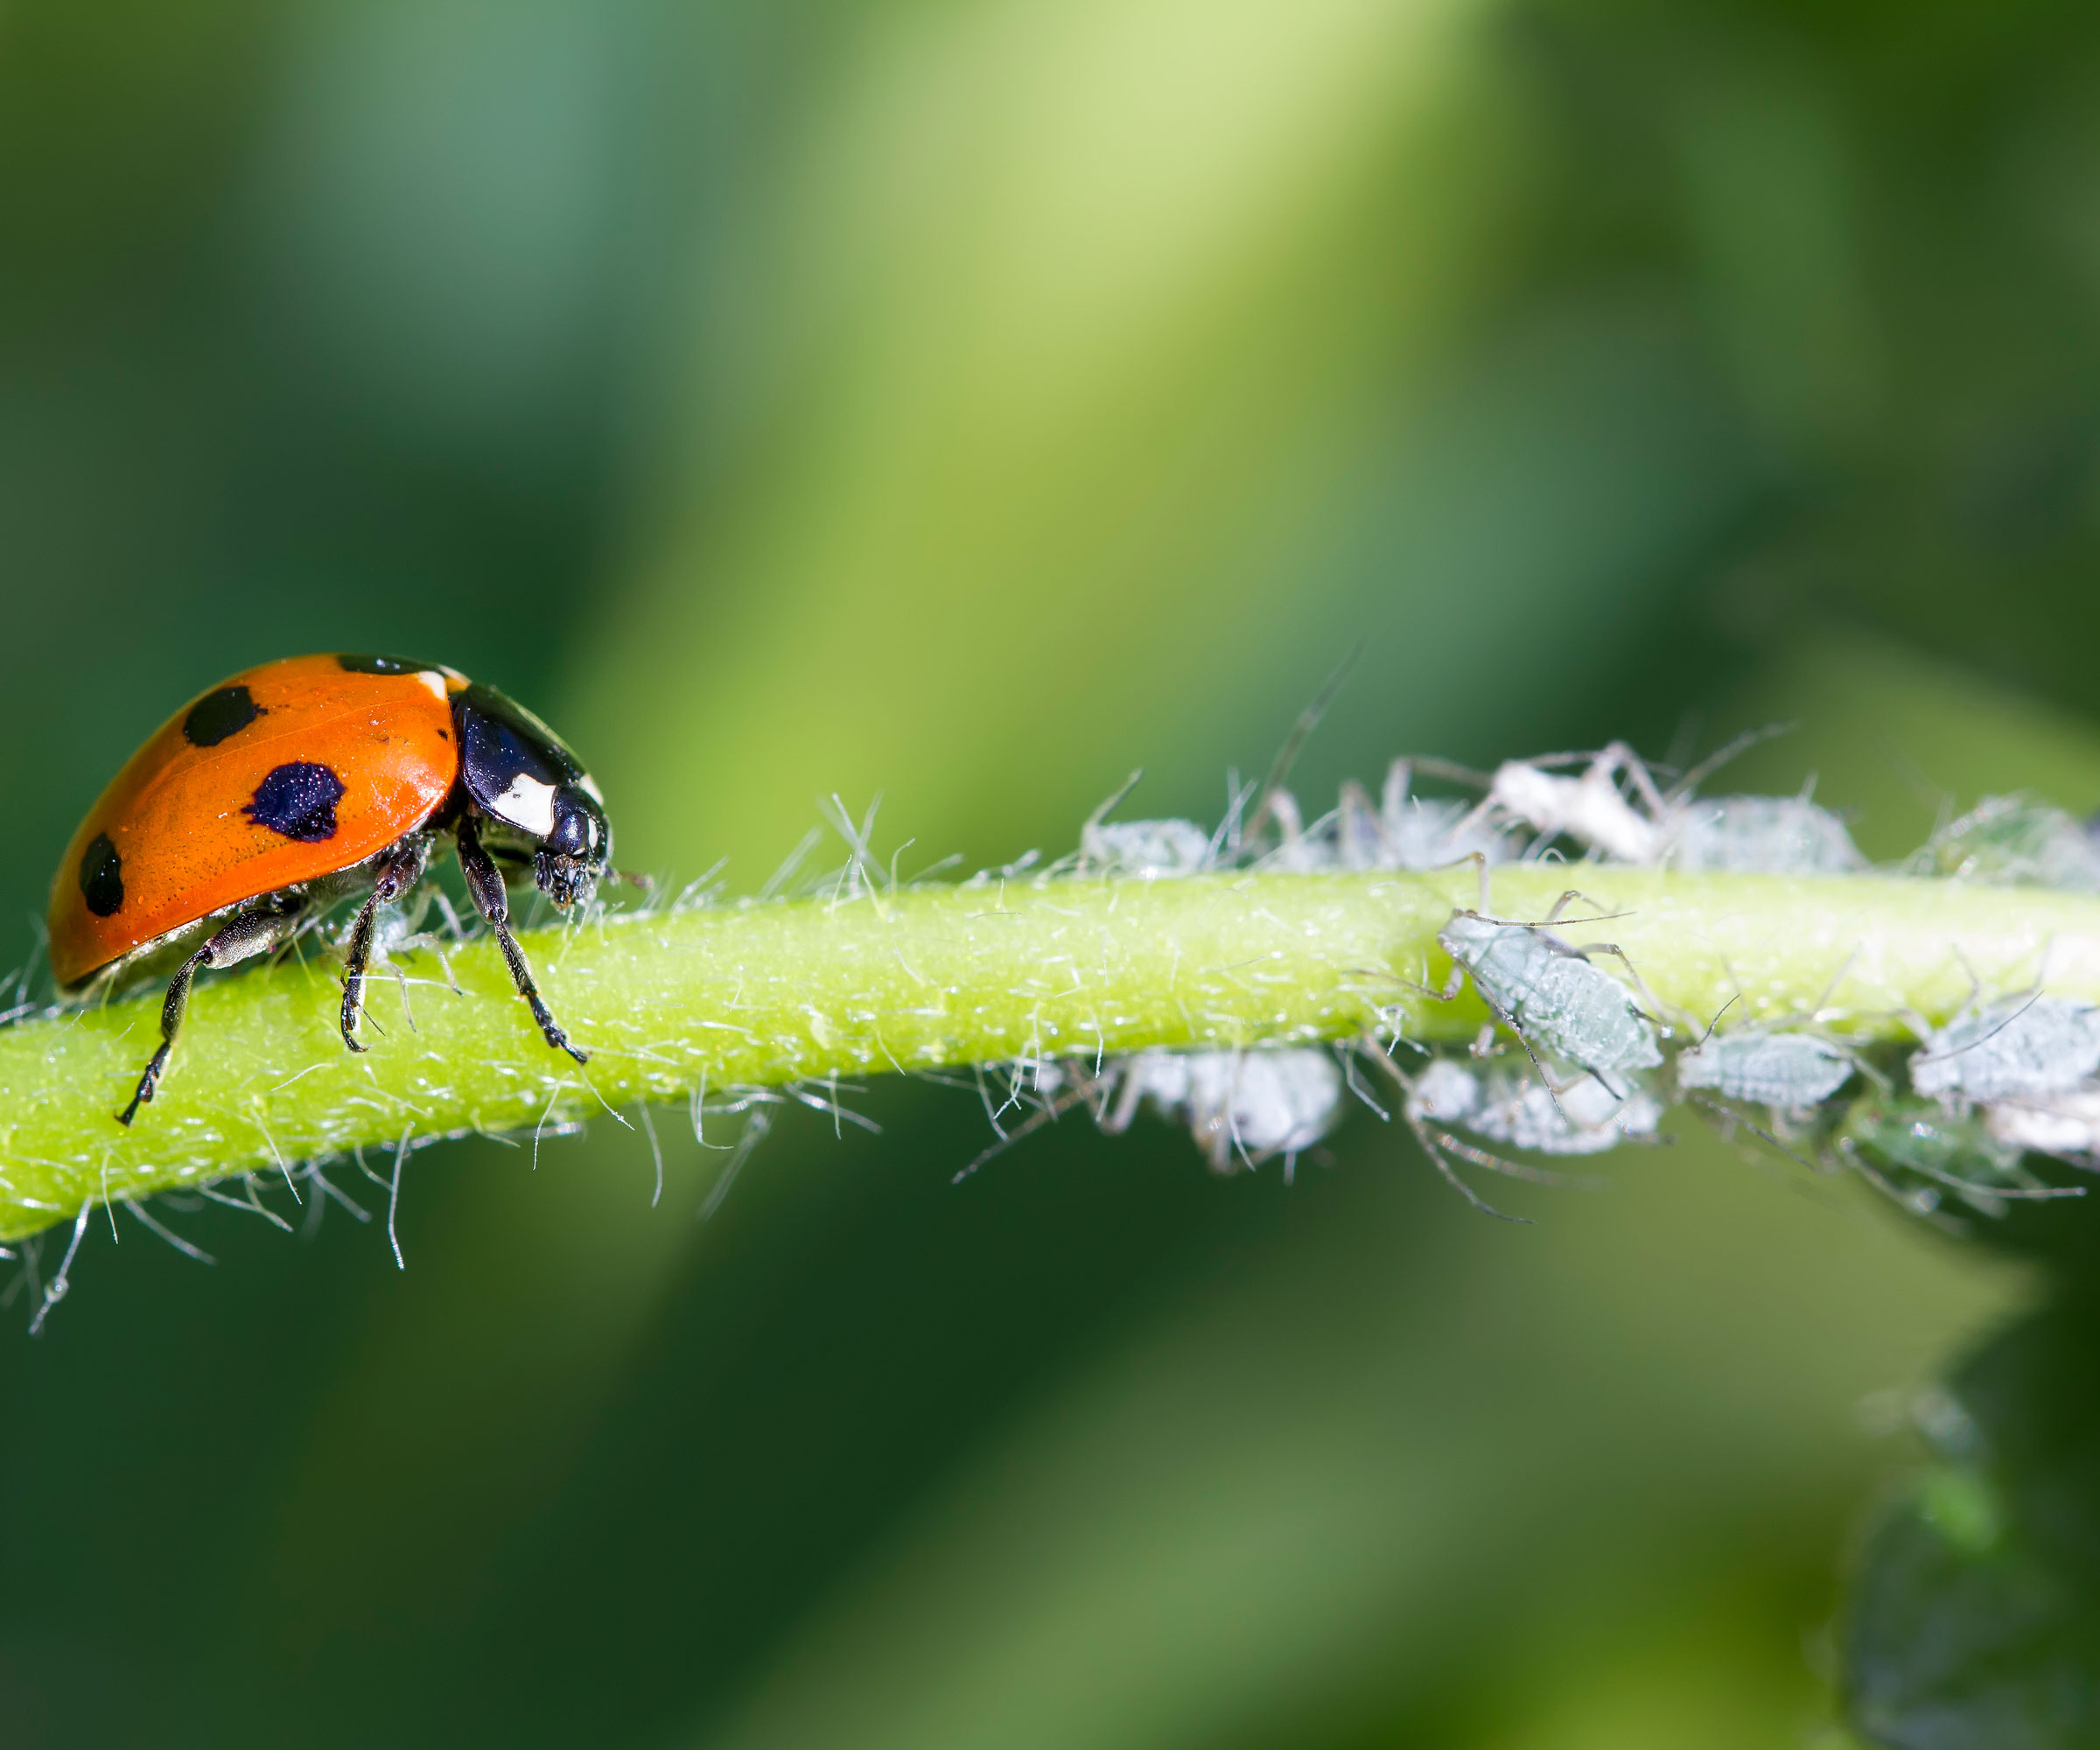 ladybird eating aphids on plant